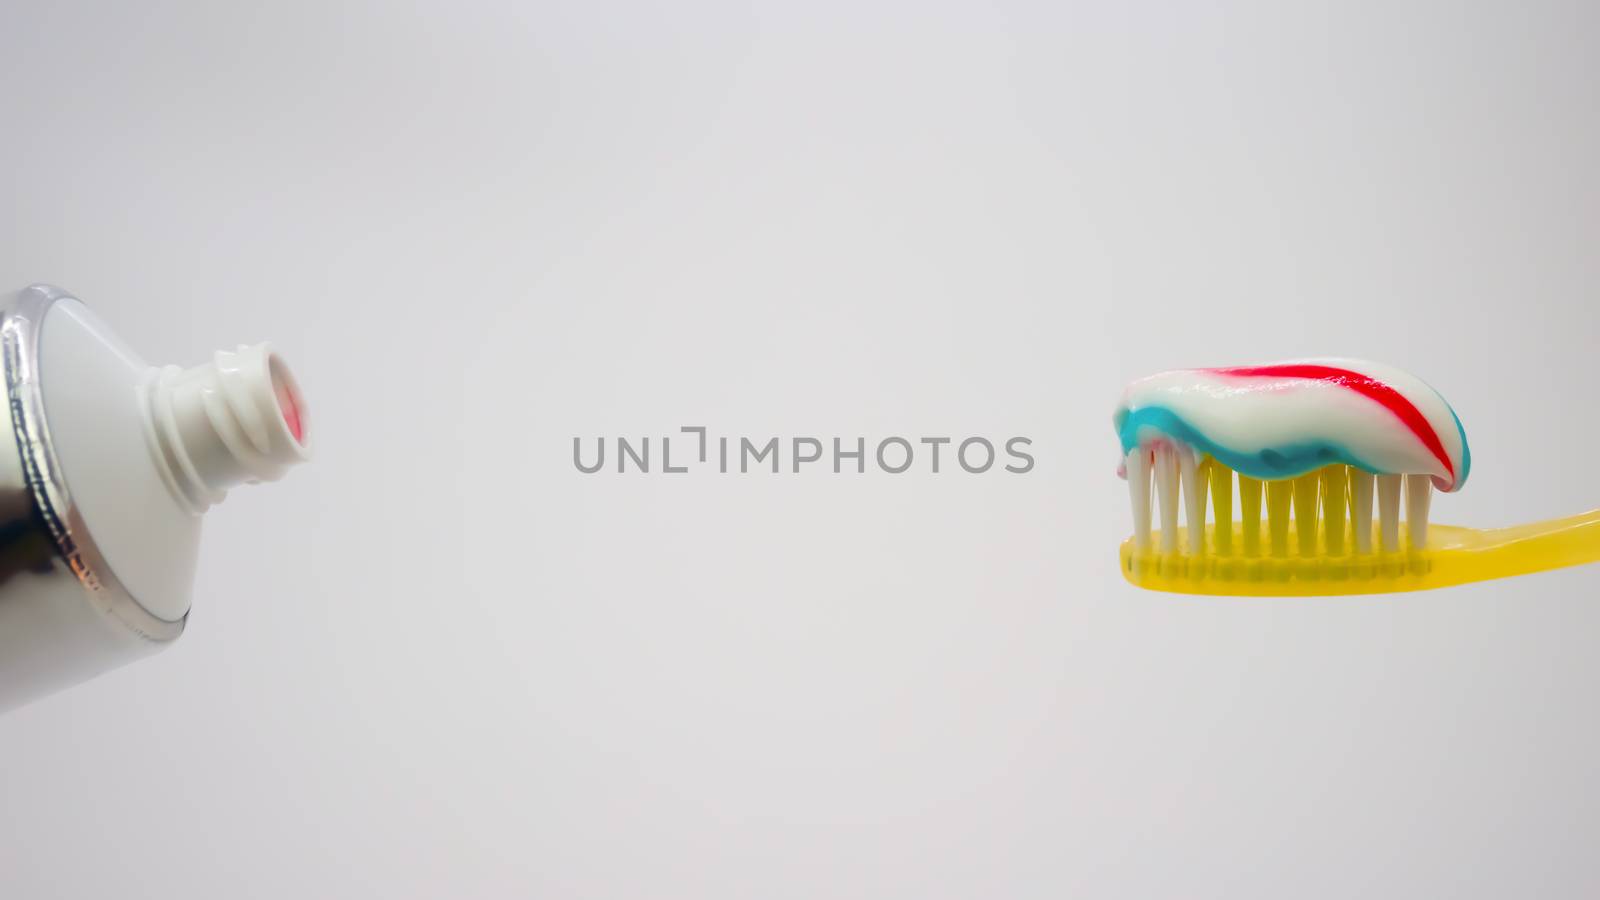 toothbrush with toothpaste on a white background